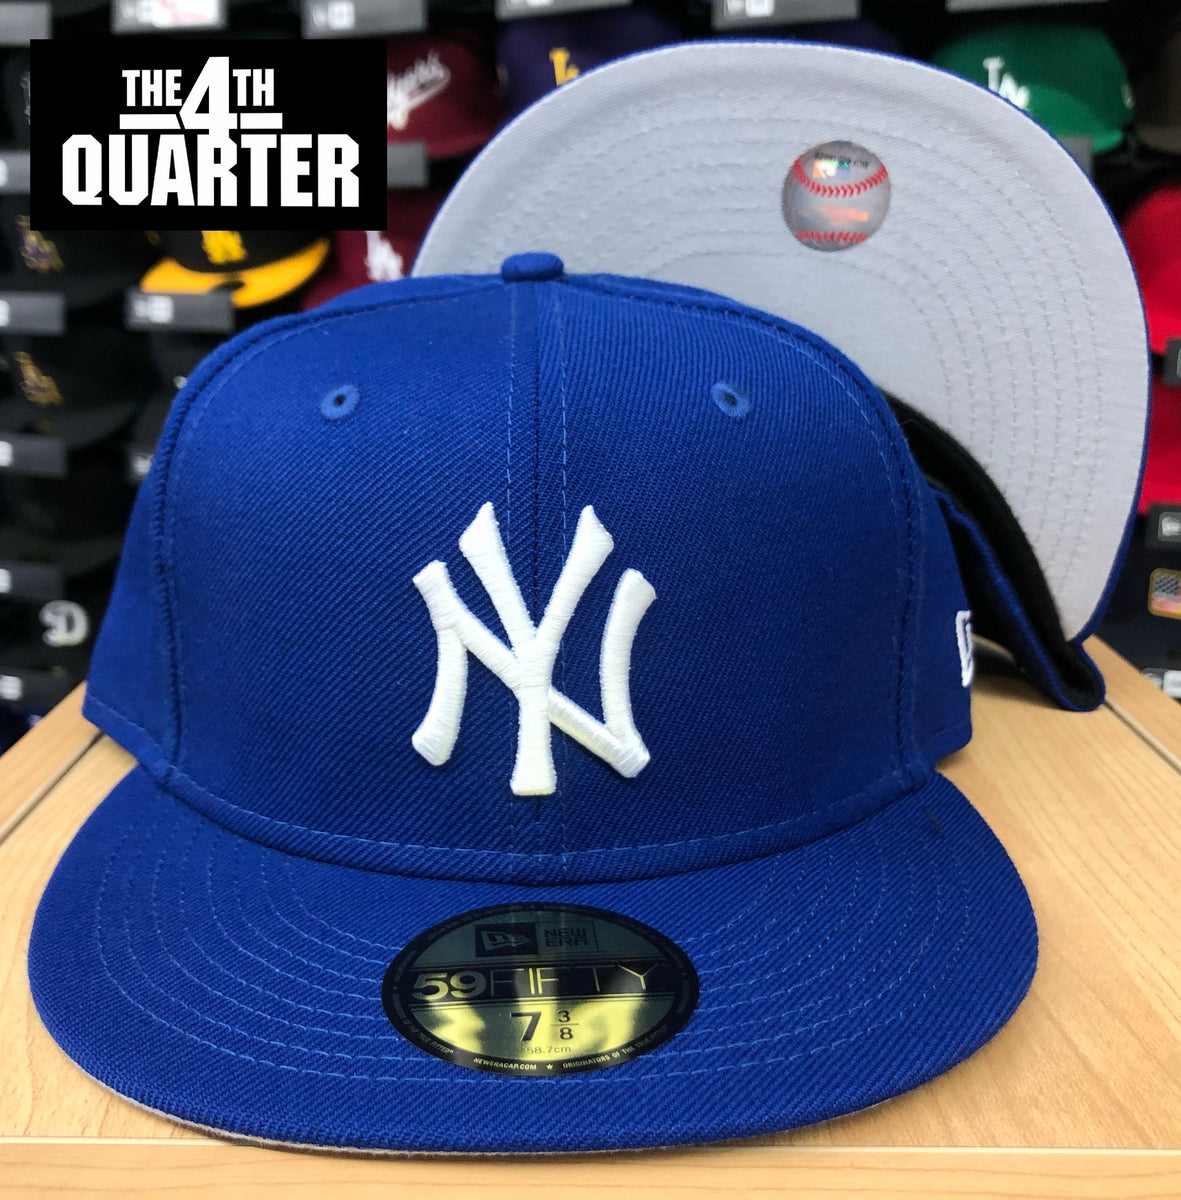 New Era 59Fifty League Basic Fitted Cap - New York Yankees/Black - New Star